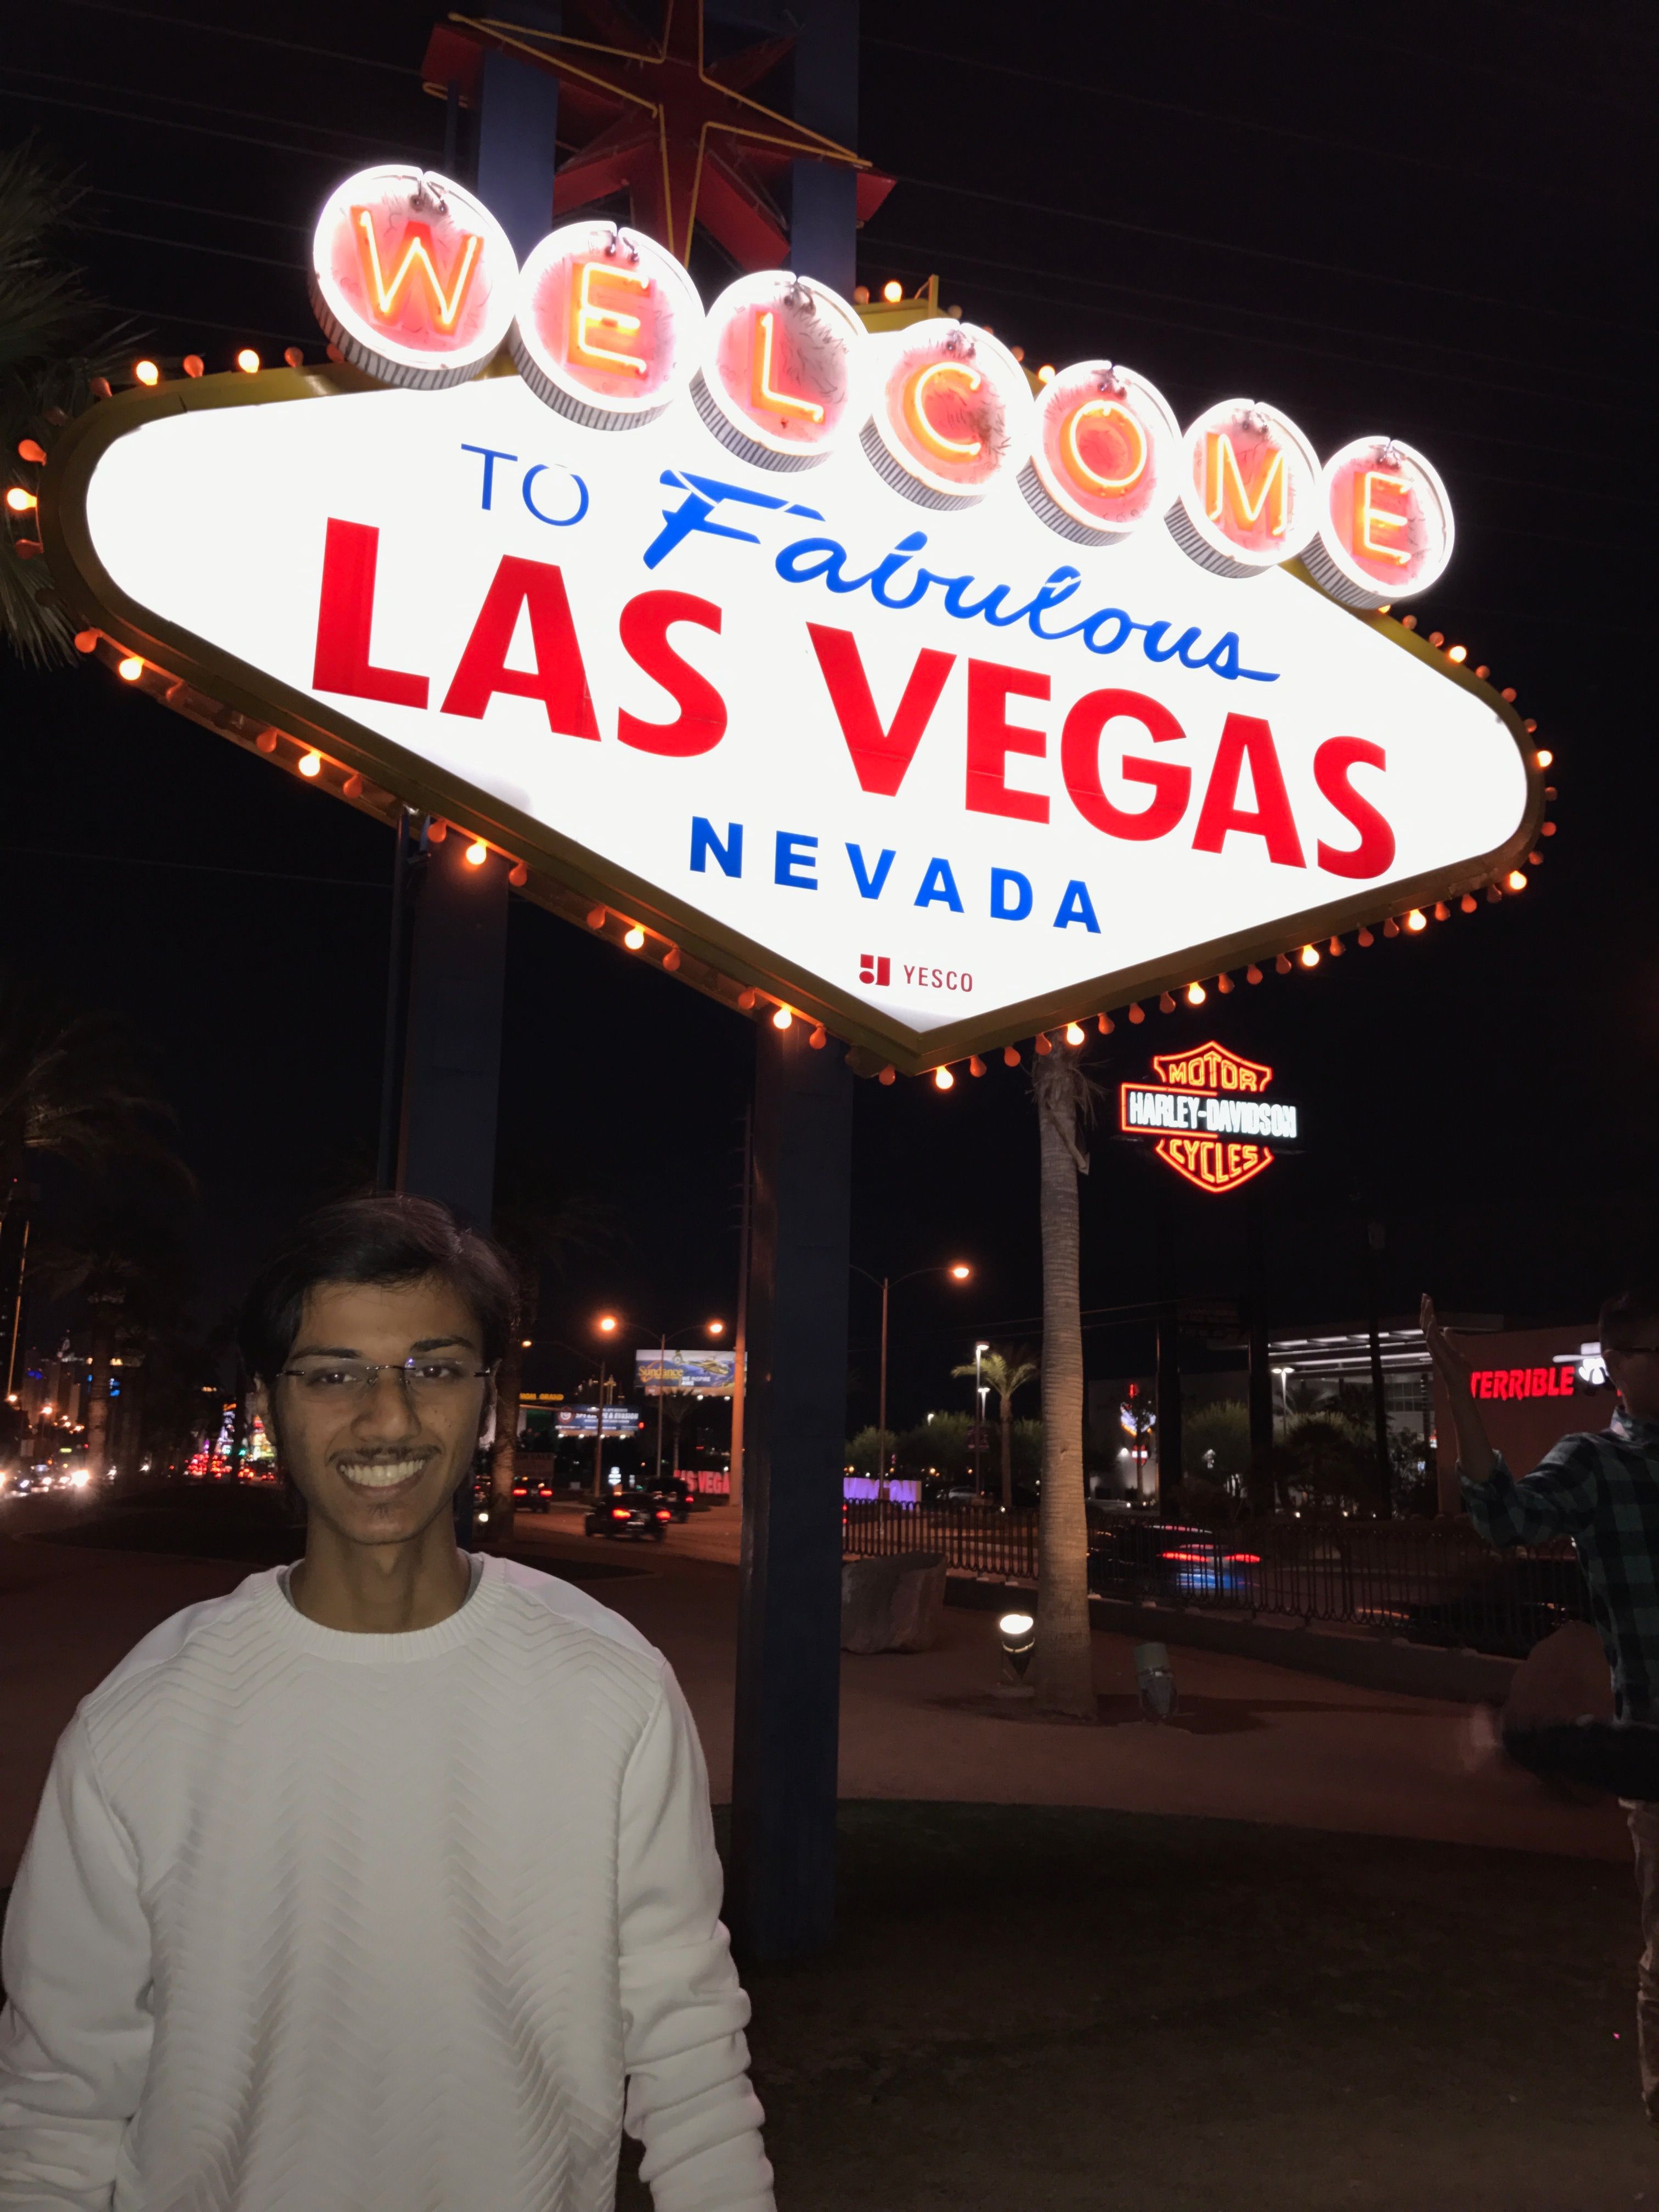 Customary &lsquo;Welcome to Las Vegas&rsquo; Pic